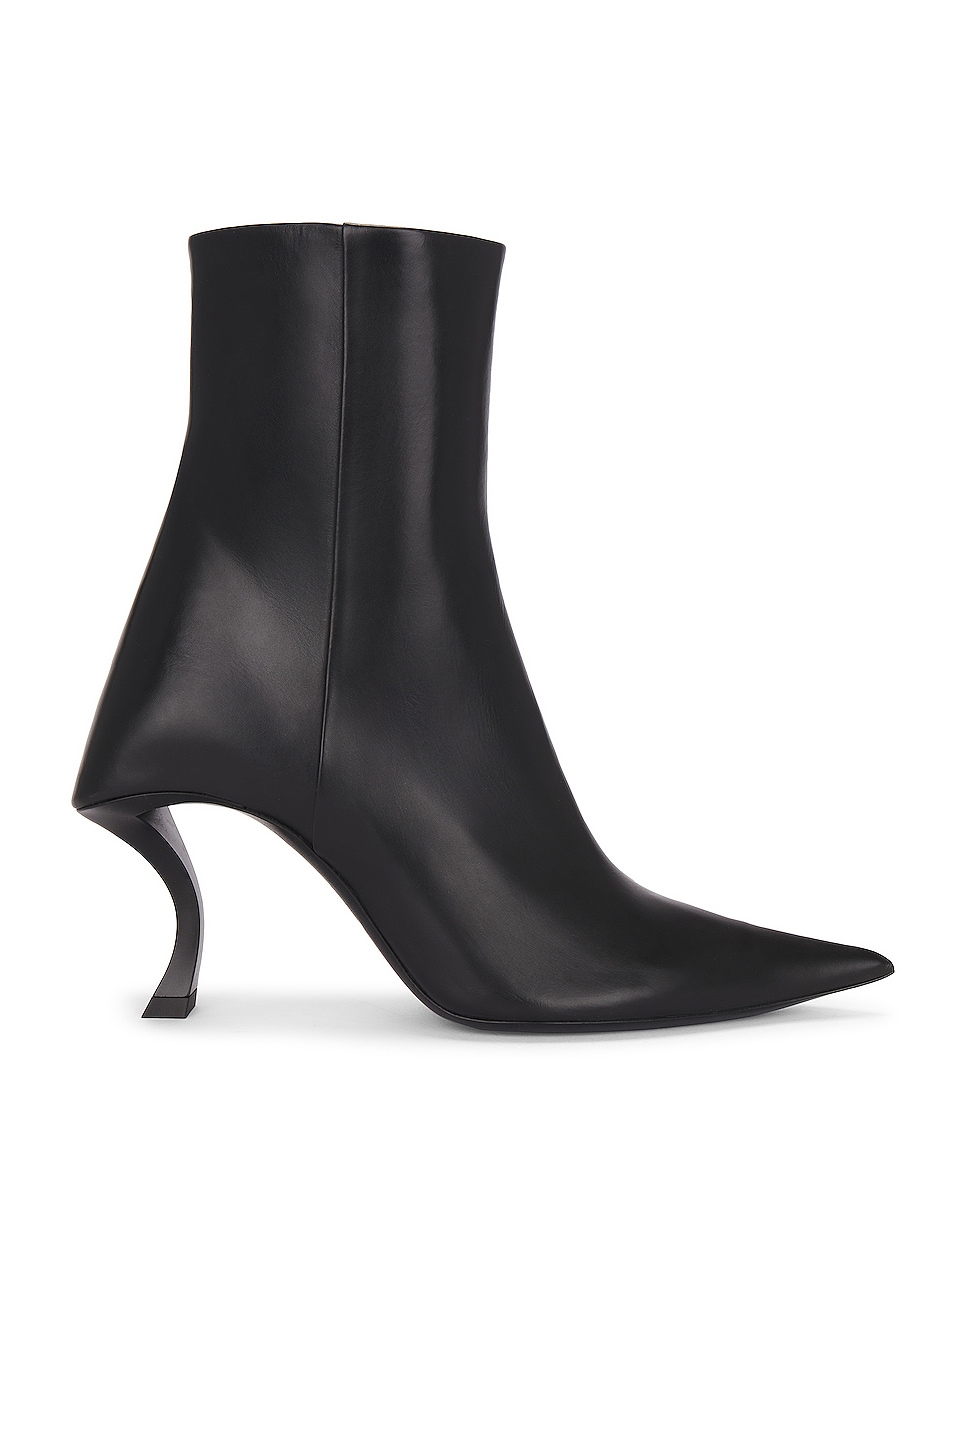 Image 1 of Balenciaga Hourglass Bootie in Black